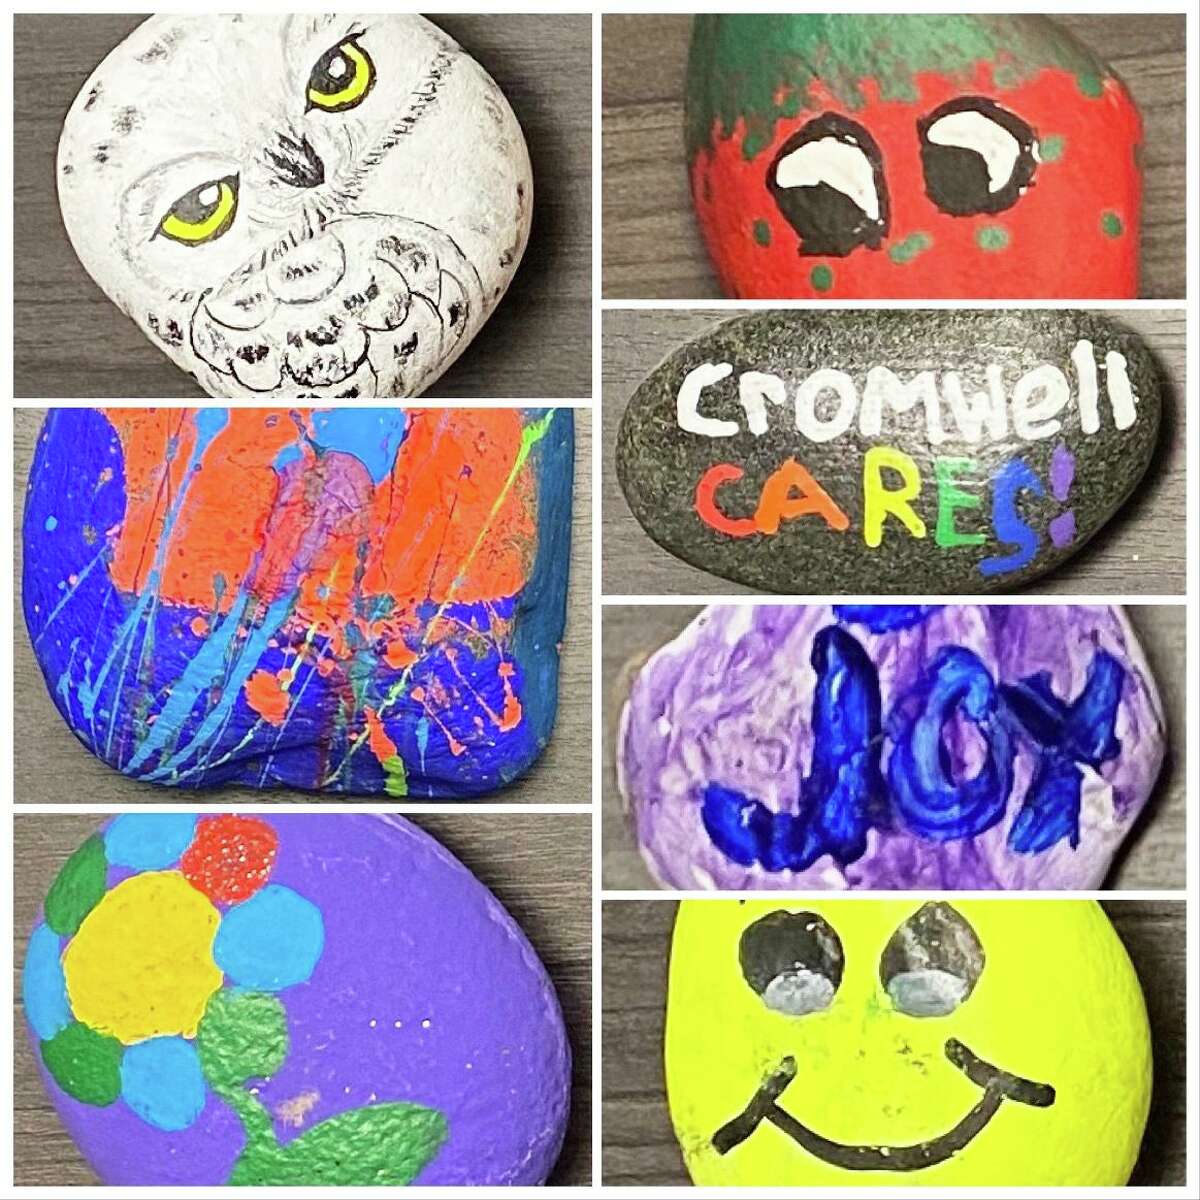 The Cromwell Creative District brings nonprofits, schools, retirement communities, and Town Hall to together. Shown here are creations made during the CCD rock hunt.